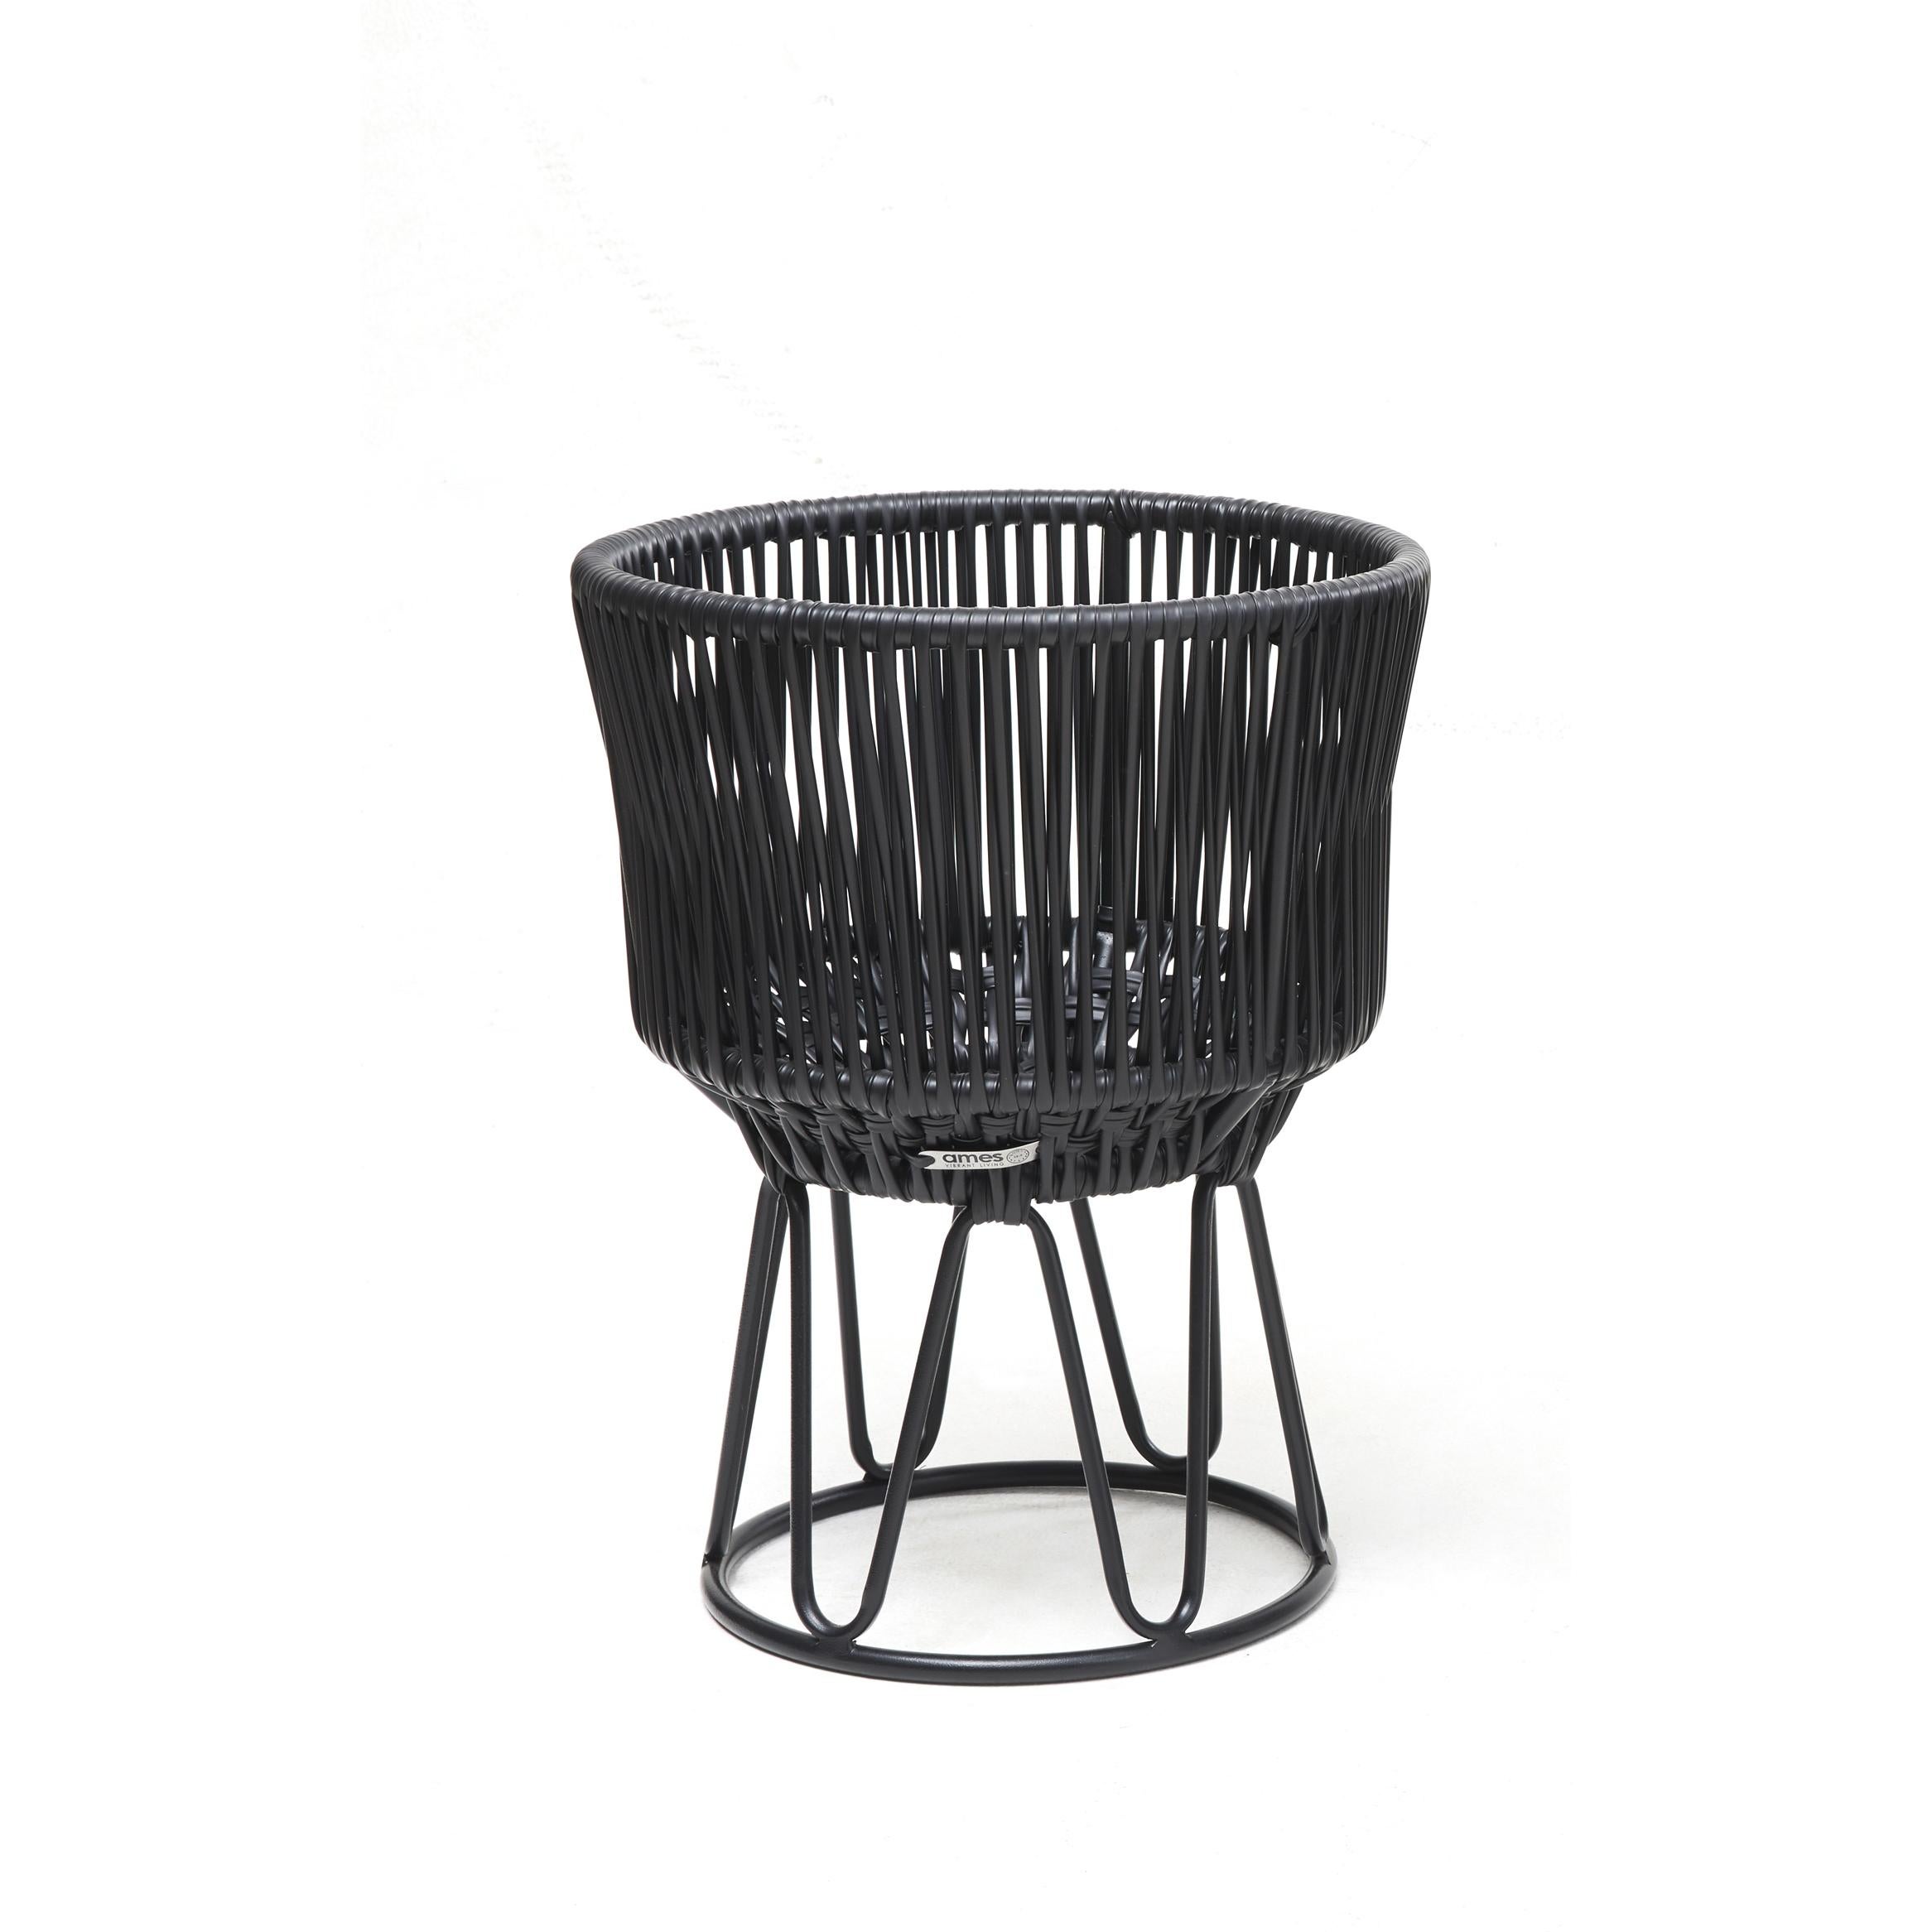 Black circo flower pot 1 by Sebastian Herkner.
Materials: Galvanized and powder-coated tubular steel. PVC strings.
Technique: Made from recycled plastic. Weaved by local craftspeople in Colombia. 
Dimensions: 
Top diameter 36 x height 48 cm